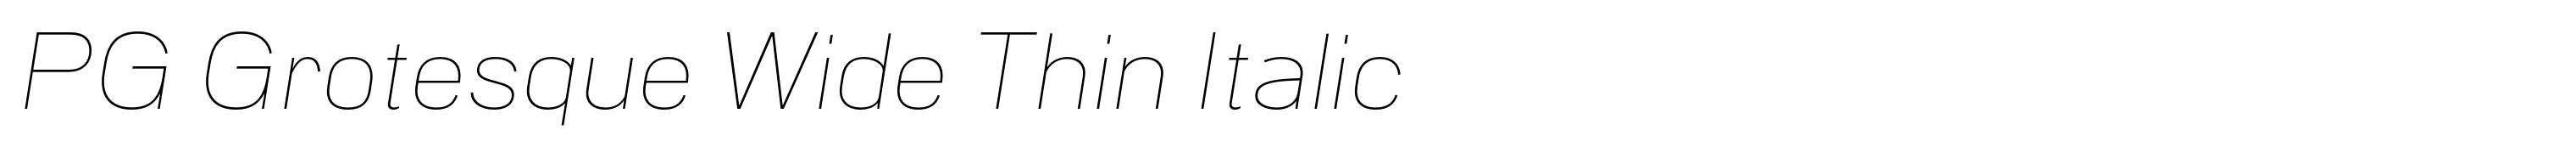 PG Grotesque Wide Thin Italic